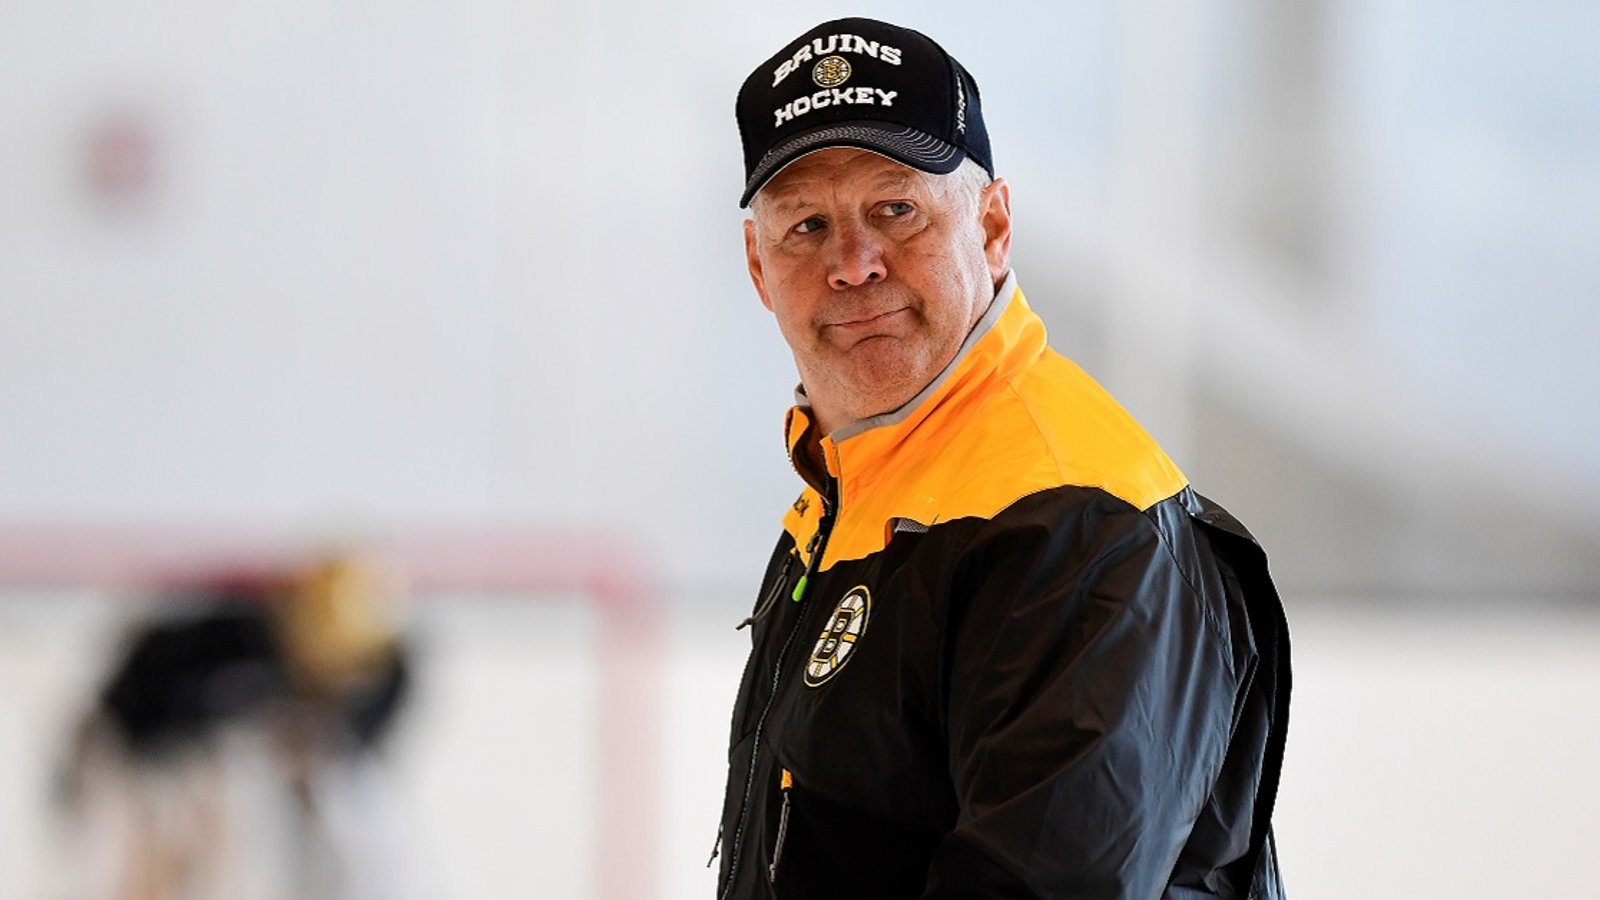 Breaking: NHL head coach fired, Claude Julien hired to replace him.